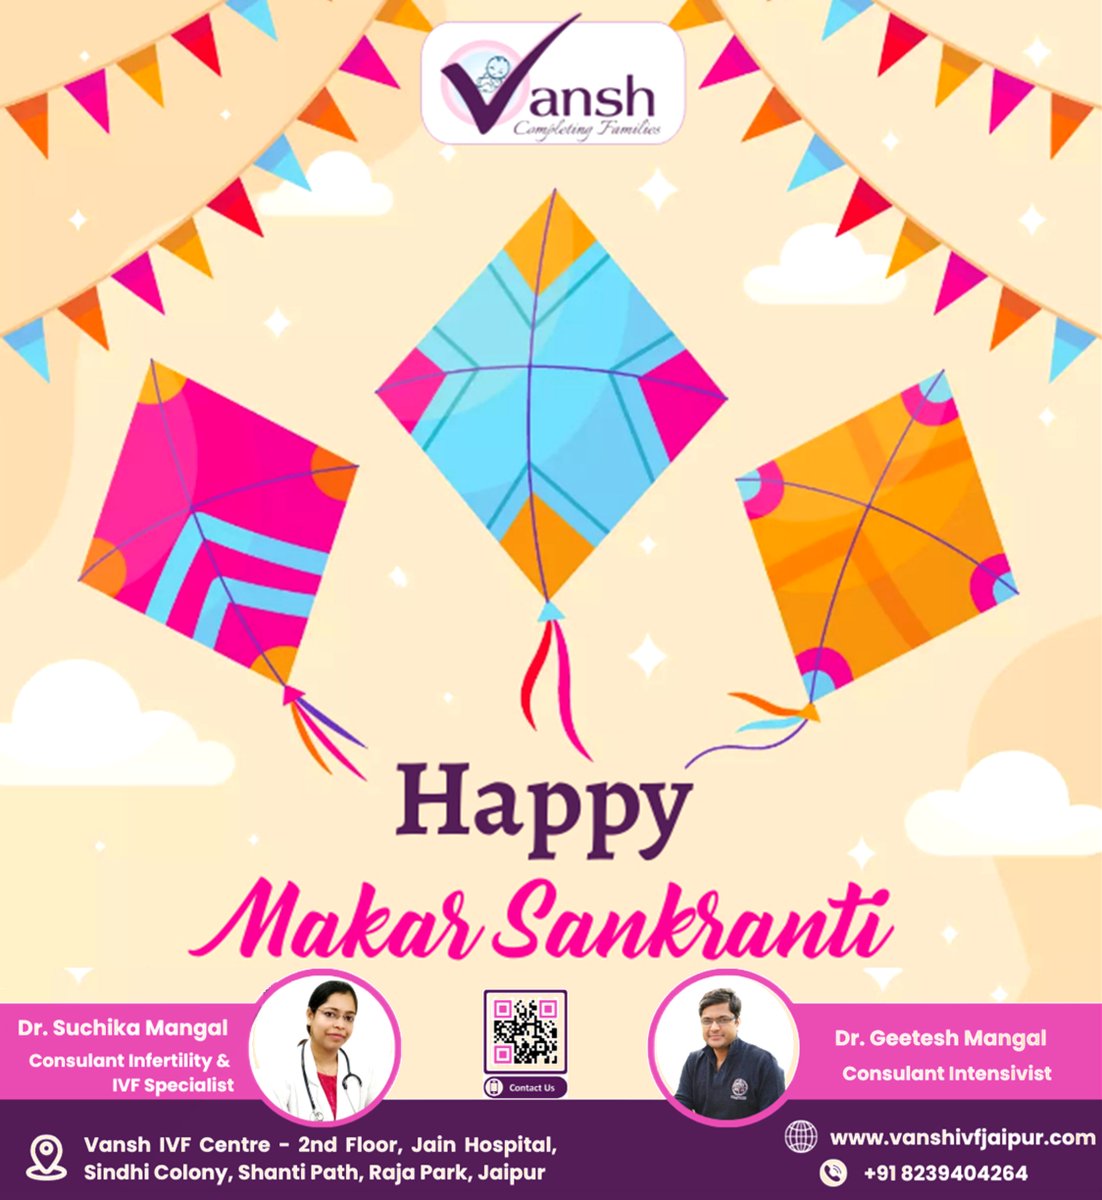 Wishing that the rising sun of 𝗠𝗮𝗸𝗮𝗿 𝗦𝗮𝗻𝗸𝗿𝗮𝗻𝘁𝗶 fills your life with bright & happy moments

#MakarSankranti #KiteFestival2024 #Happiness #Family #Wishes #IVFCentreinJaipur #BookAppointment  #VanshIVFCentre #DrSuchikaMangal #IVFSpecialist #Rajapark #Jaipur